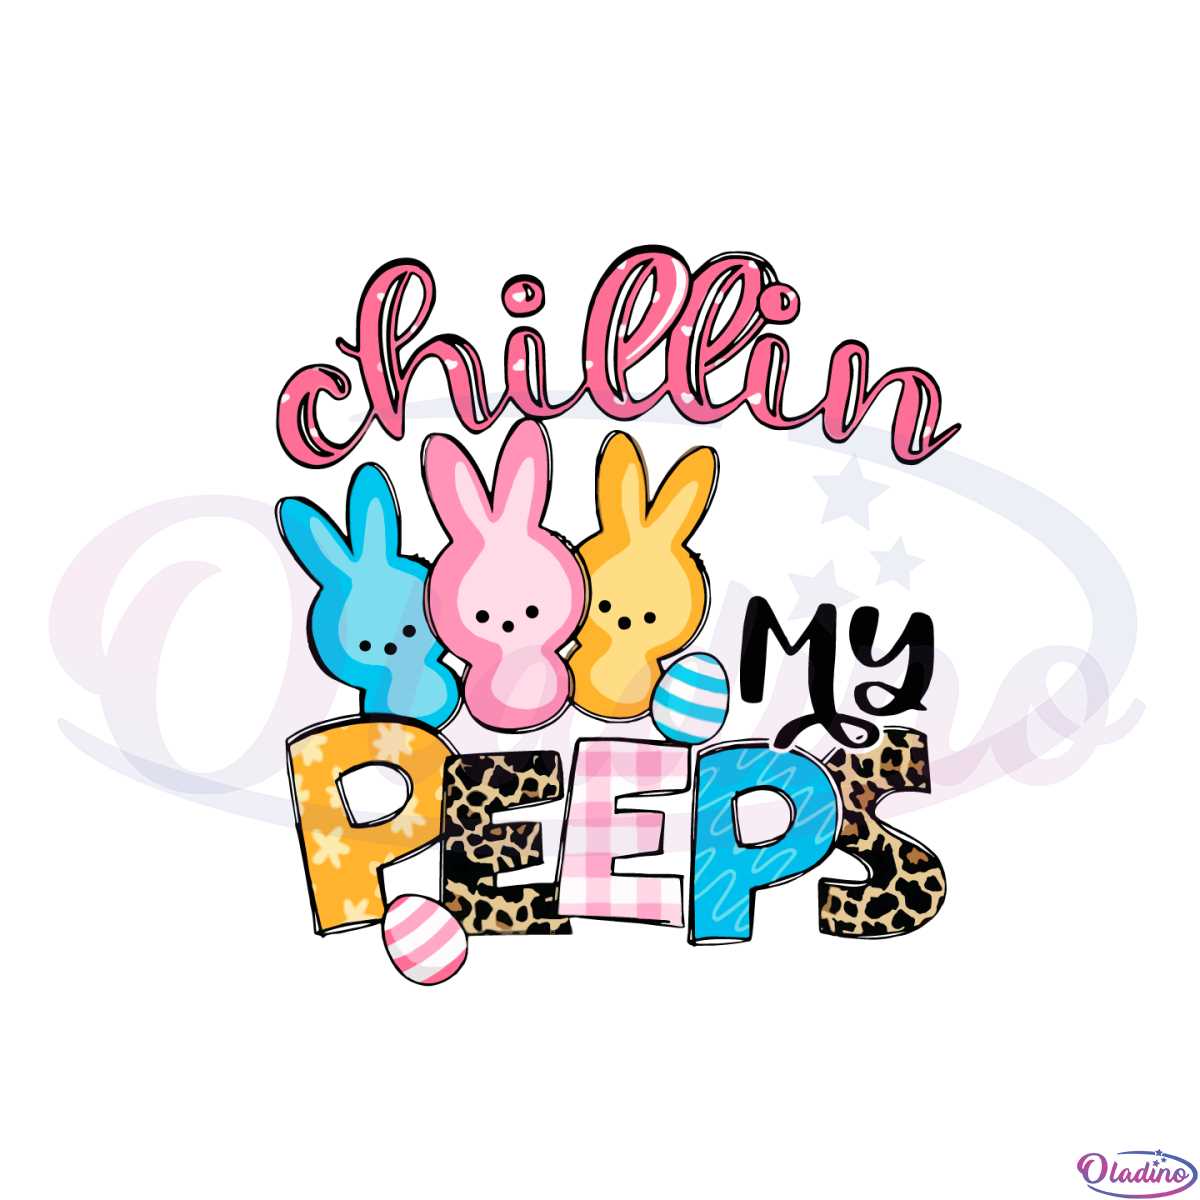 chillin-with-my-peeps-funny-easter-peeps-svg-graphic-designs-files